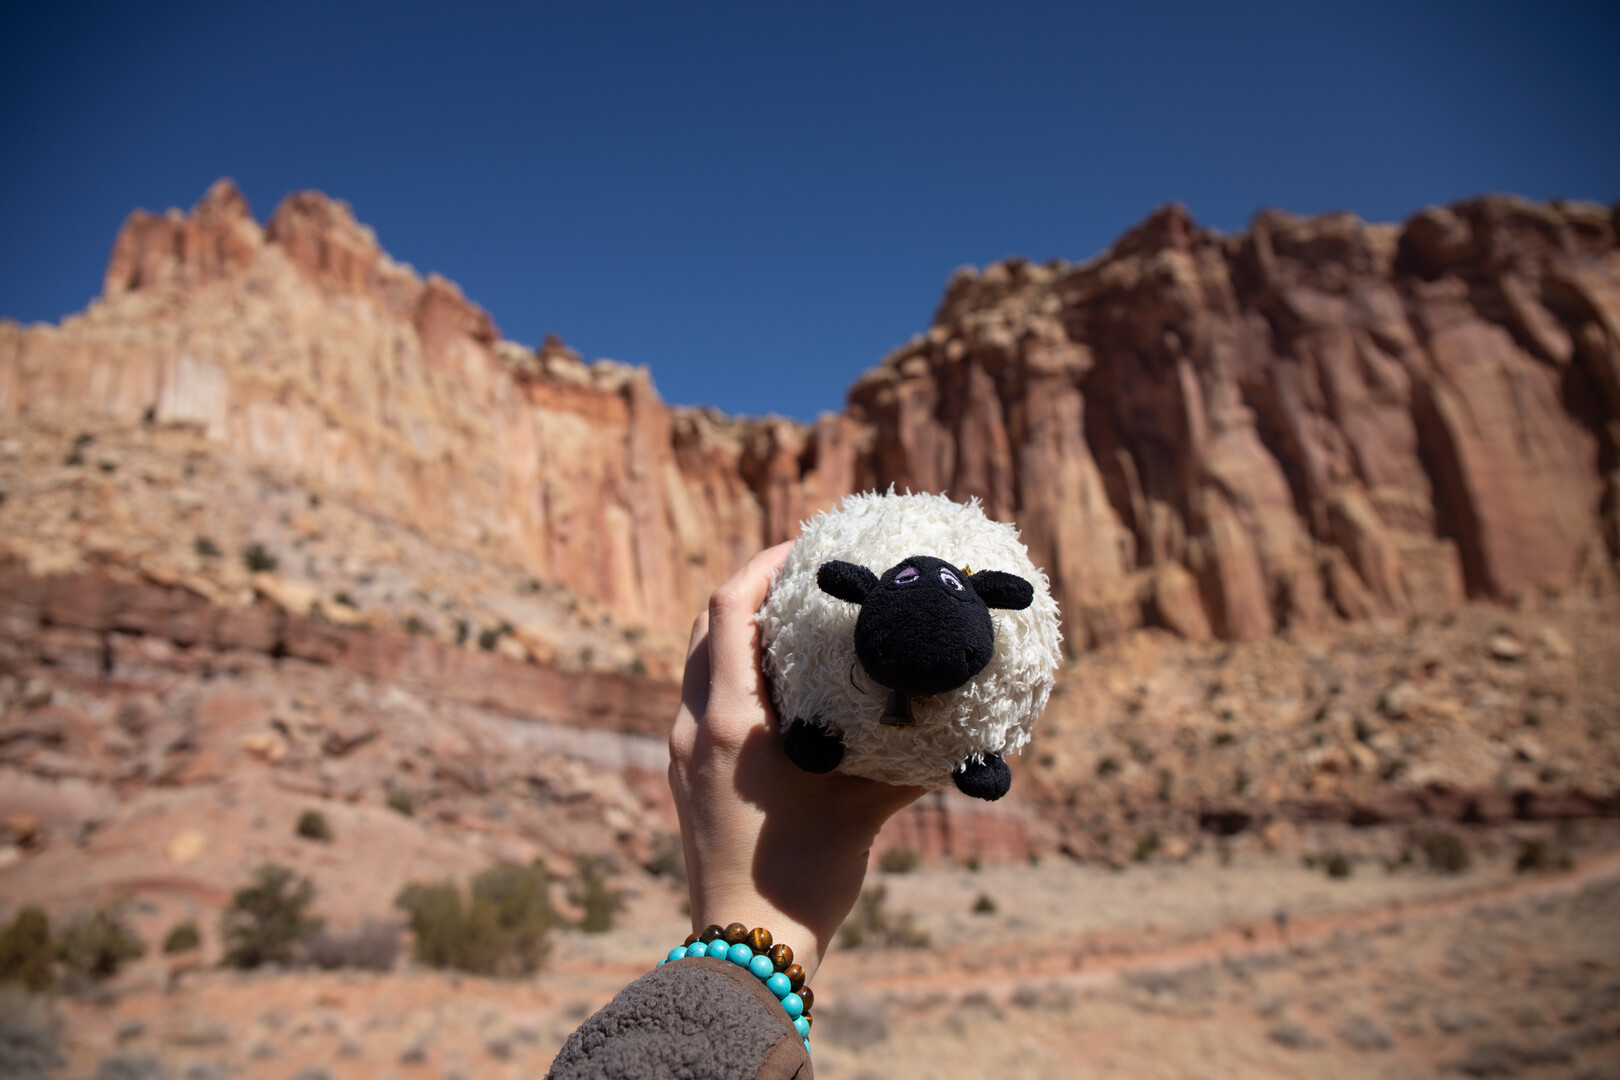 Mia Degner '24 has a sheep stuffed animal that travels with her wherever she goes, and this time, Shirley is in Capitol Reef National Park in Utah, on April 1, 2023. Photo by Mila Naumovska '26.